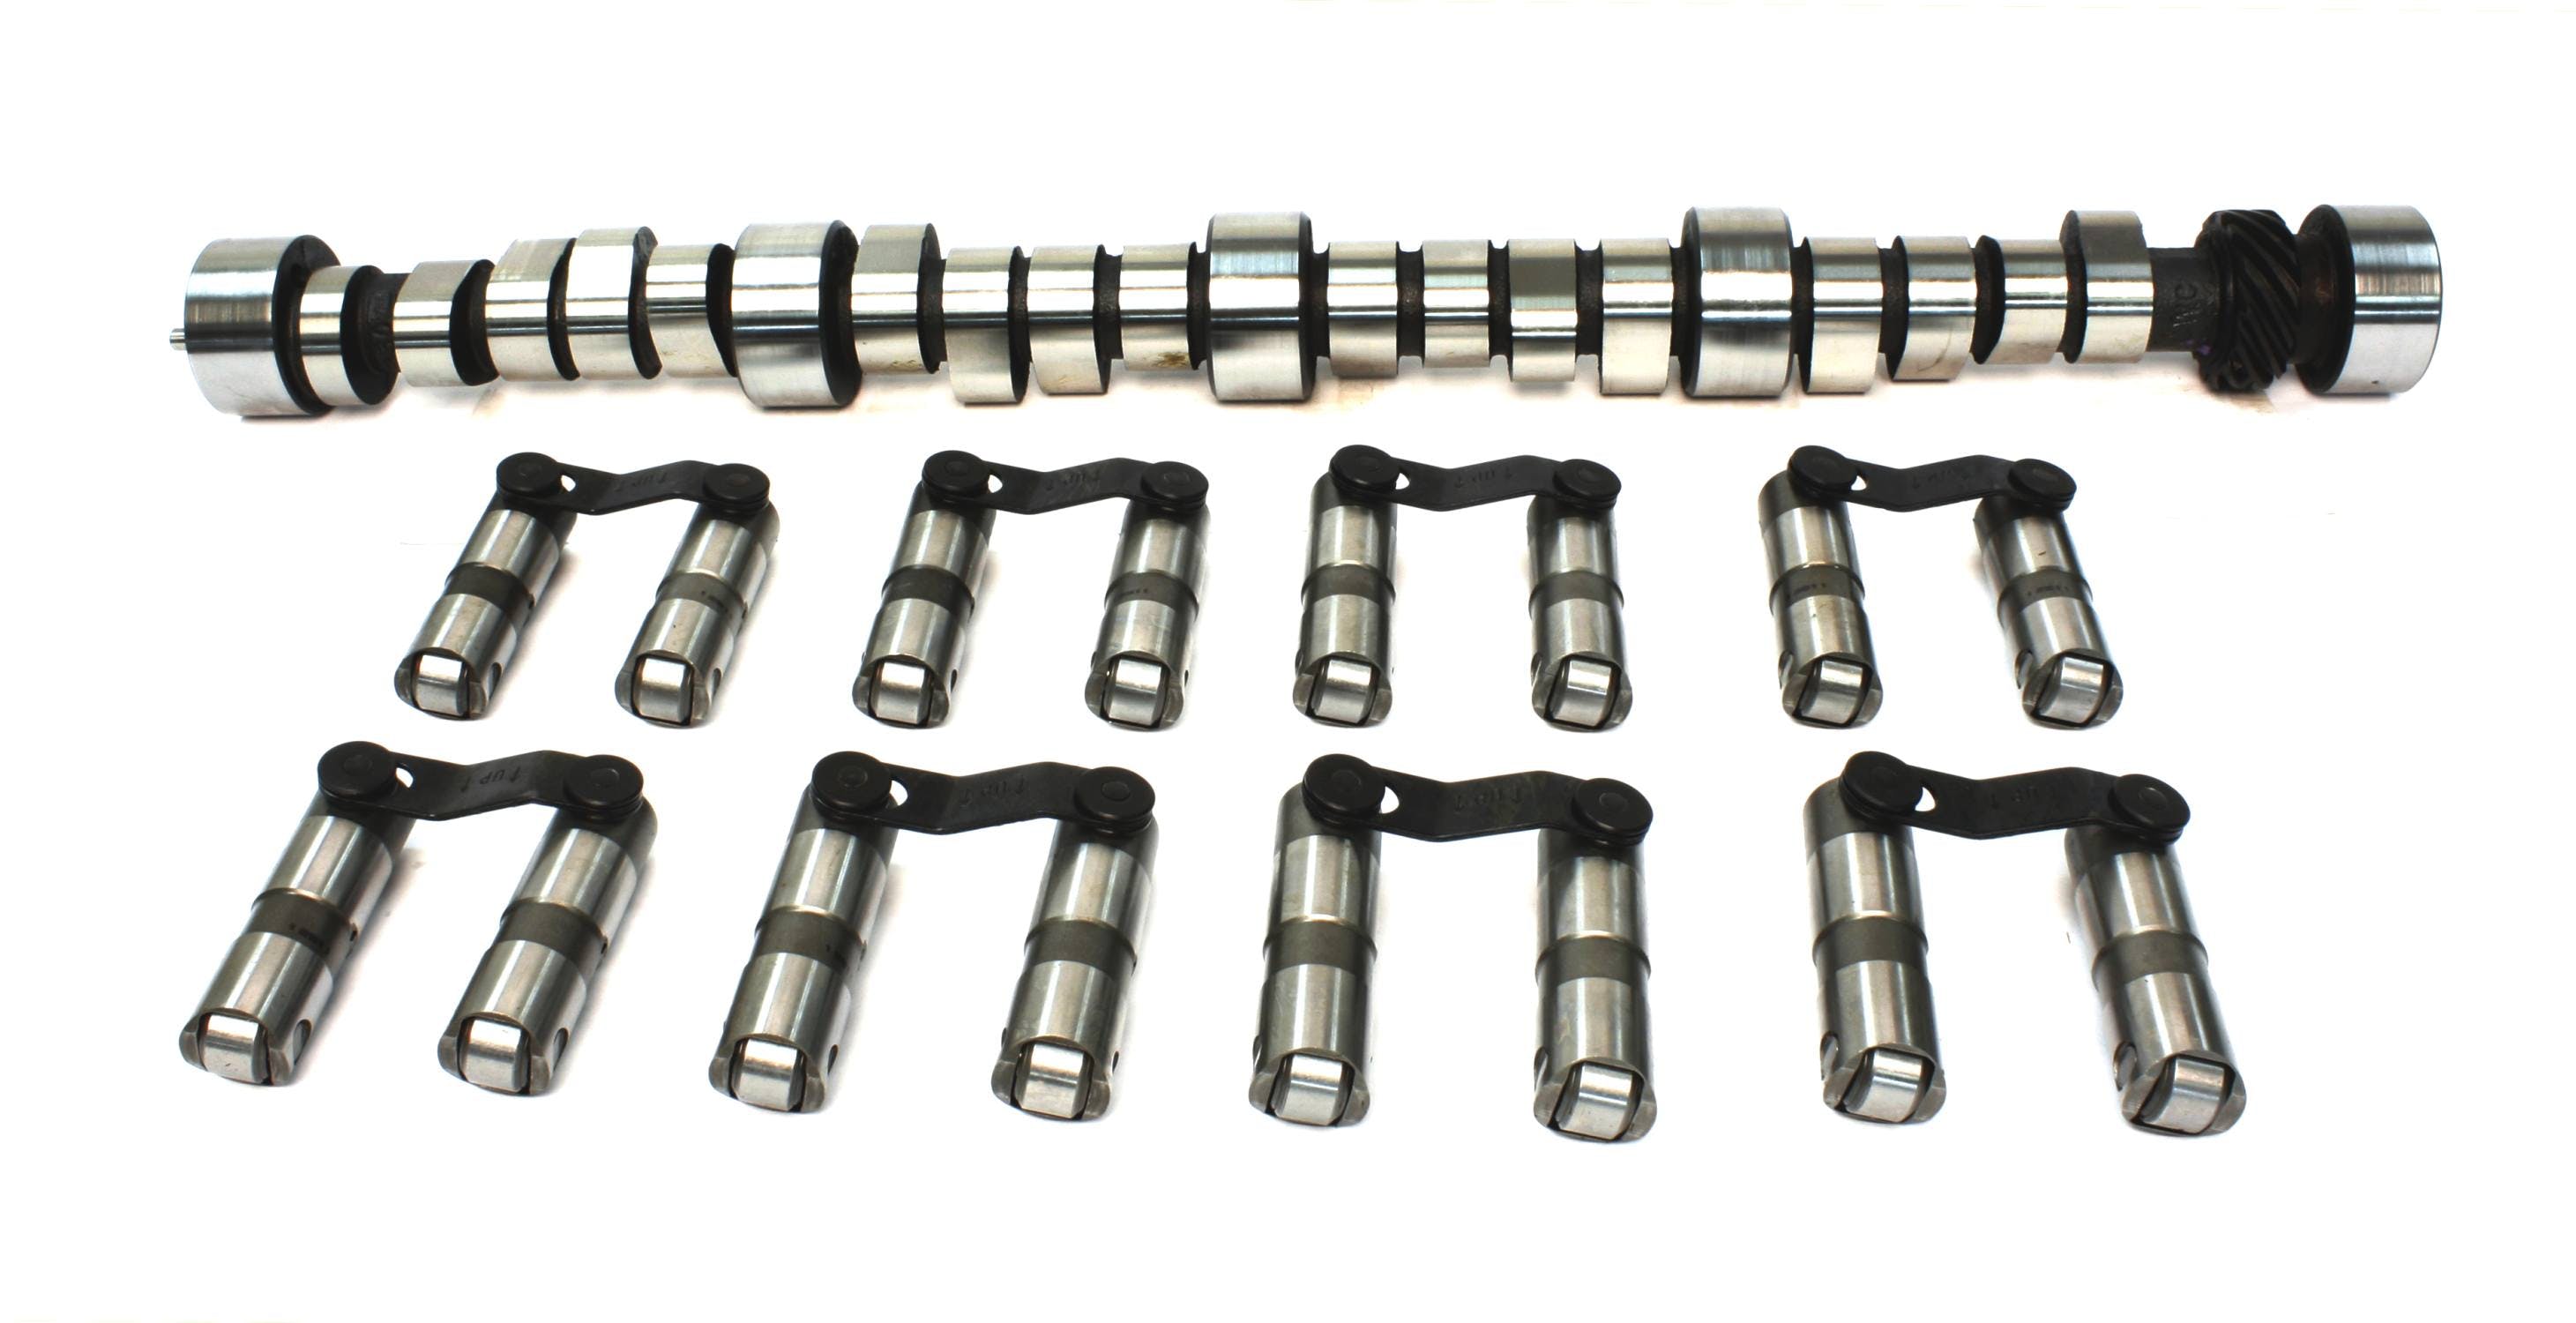 Competition Cams CL11-414-8 NITROUS HP 242/254 HYDRAULIC ROLLER CAM/LIFTER KIT CHEVROLET BIG BLOCK 396-454